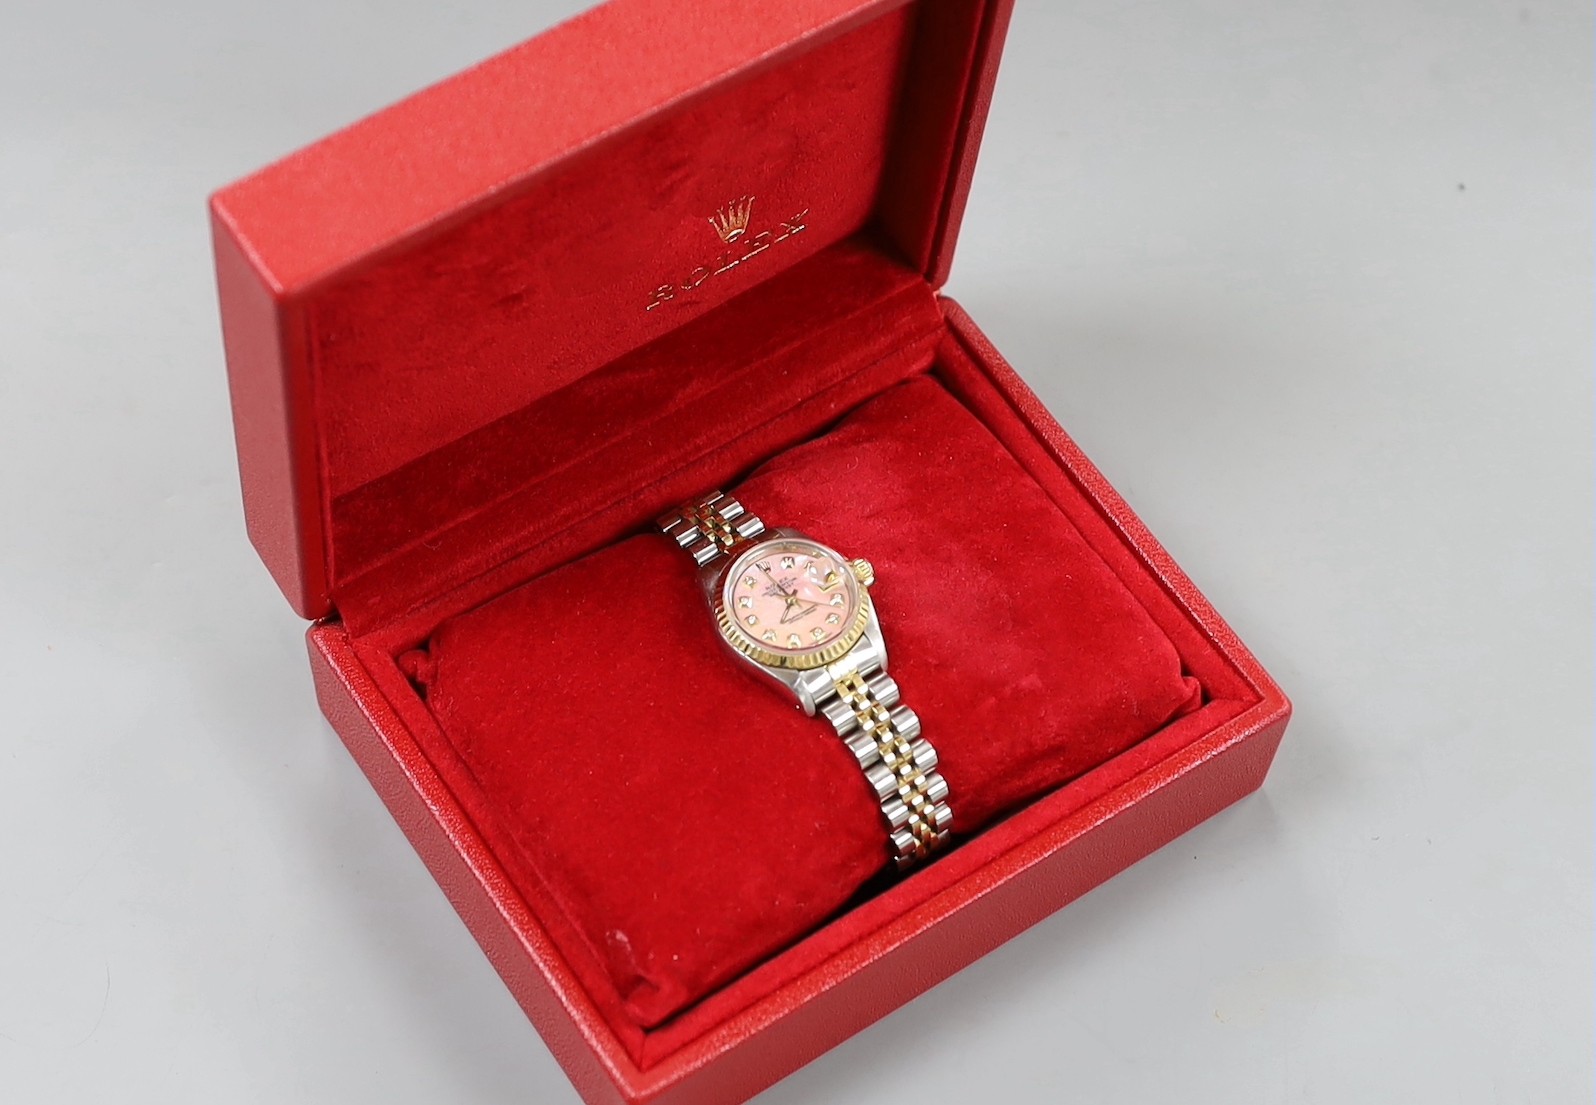 A lady's 2015 steel and gold Rolex Oyster Perpetual Datejust wrist watch, with pink mother of pearl dial and diamond set markers, model no. 69173, serial no. R401799, case diameter 26mm, with box and certificate.